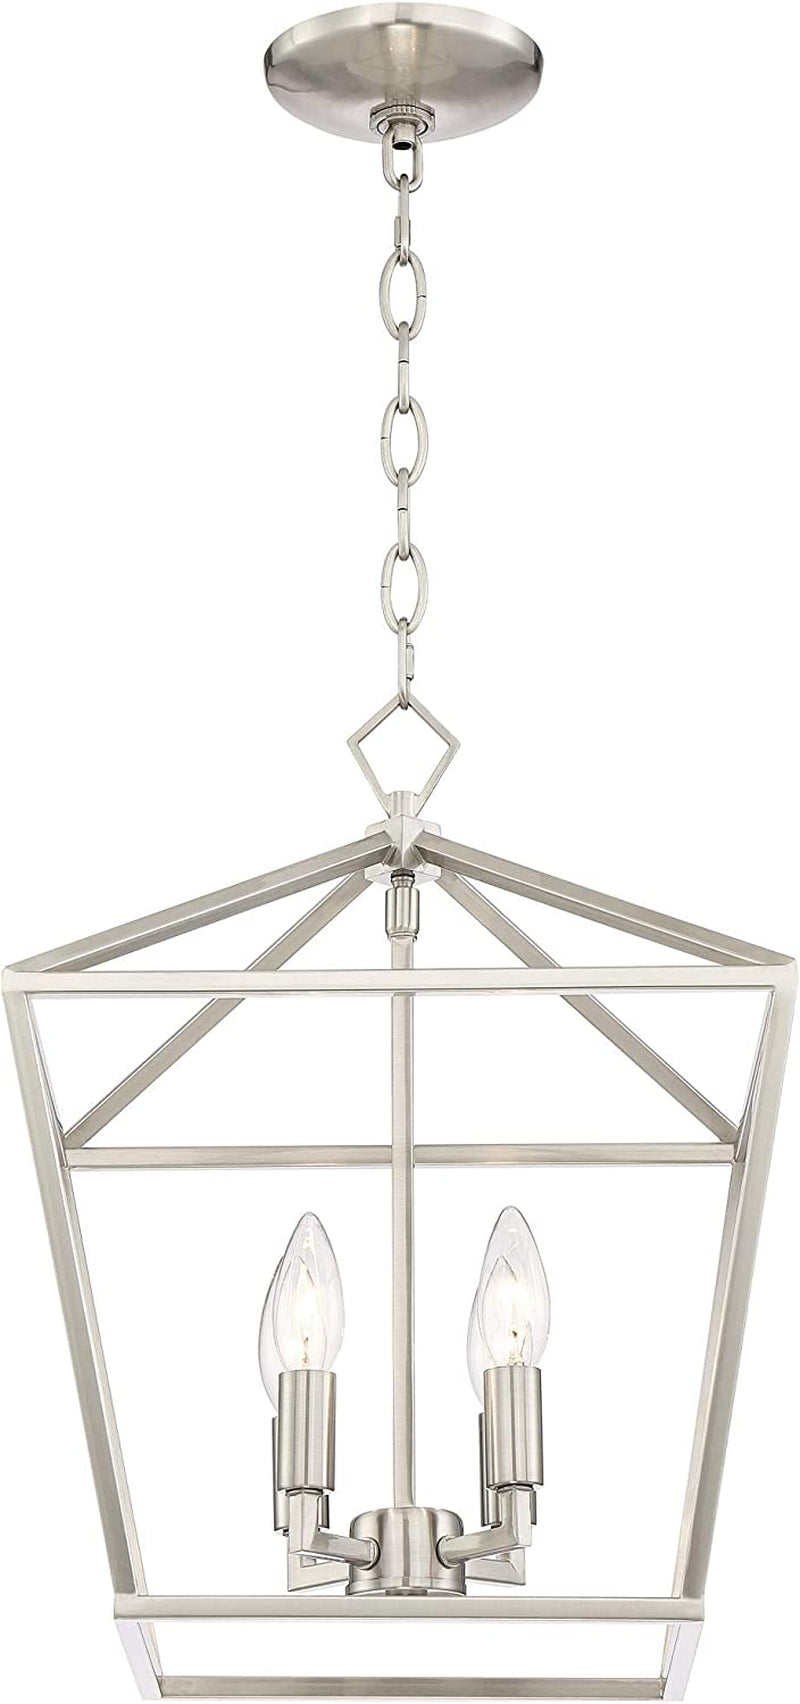 Franklin Iron Works Queluz Brushed Nickel Small Pendant Chandelier 13" Wide Industrial Farmhouse Geometric Cage Frame 4-Light Fixture Dining Room House Bedroom Kitchen Island Hallway High Ceilings Home & Garden > Lighting > Lighting Fixtures > Chandeliers Lamps Plus   